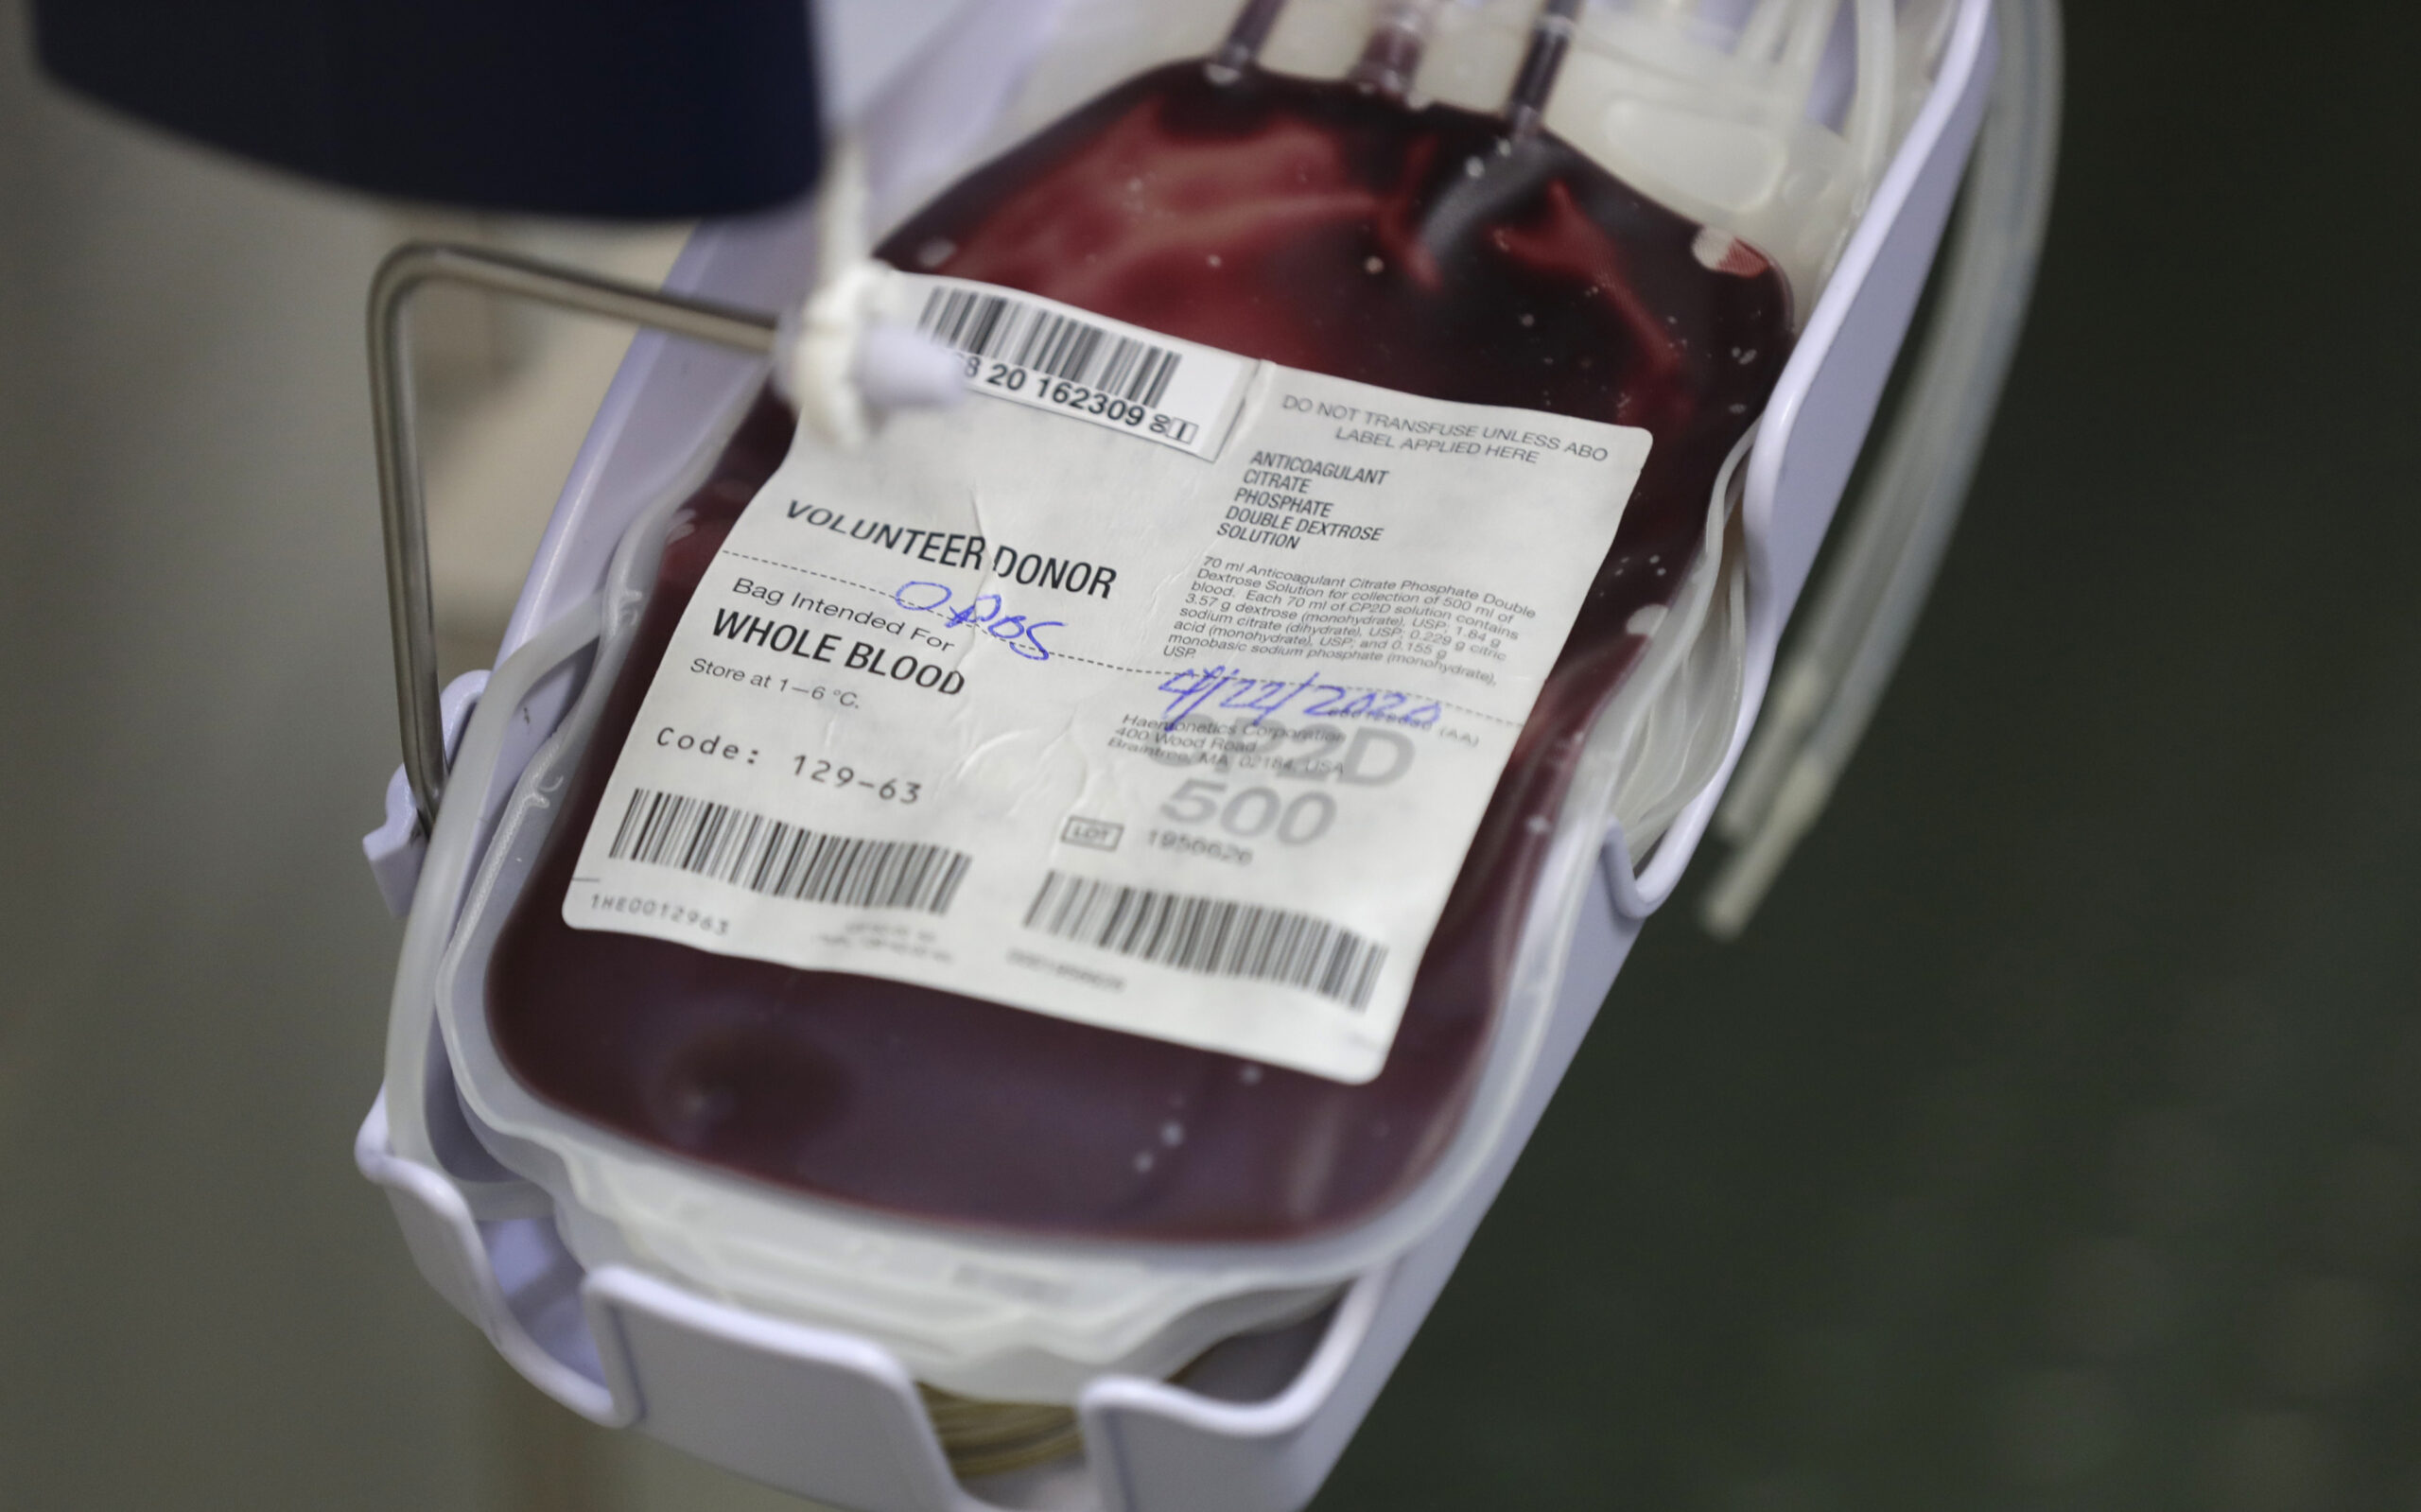 Blood reserves low after winter storms